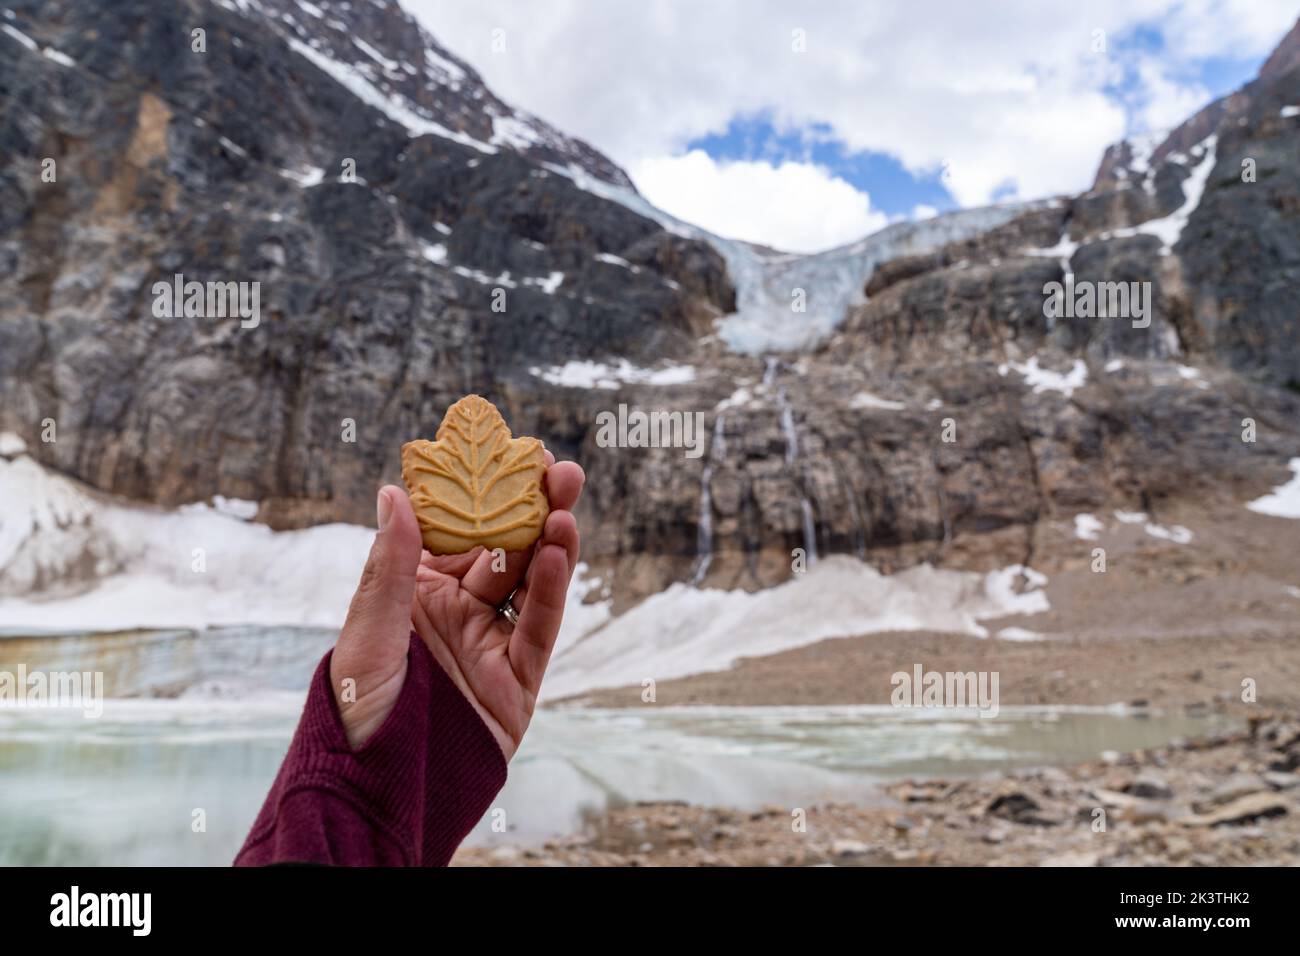 Hand holds up an iconic maple leaf cream cookie while exploring Mt. Edith Cavell and Angel Glacier Stock Photo